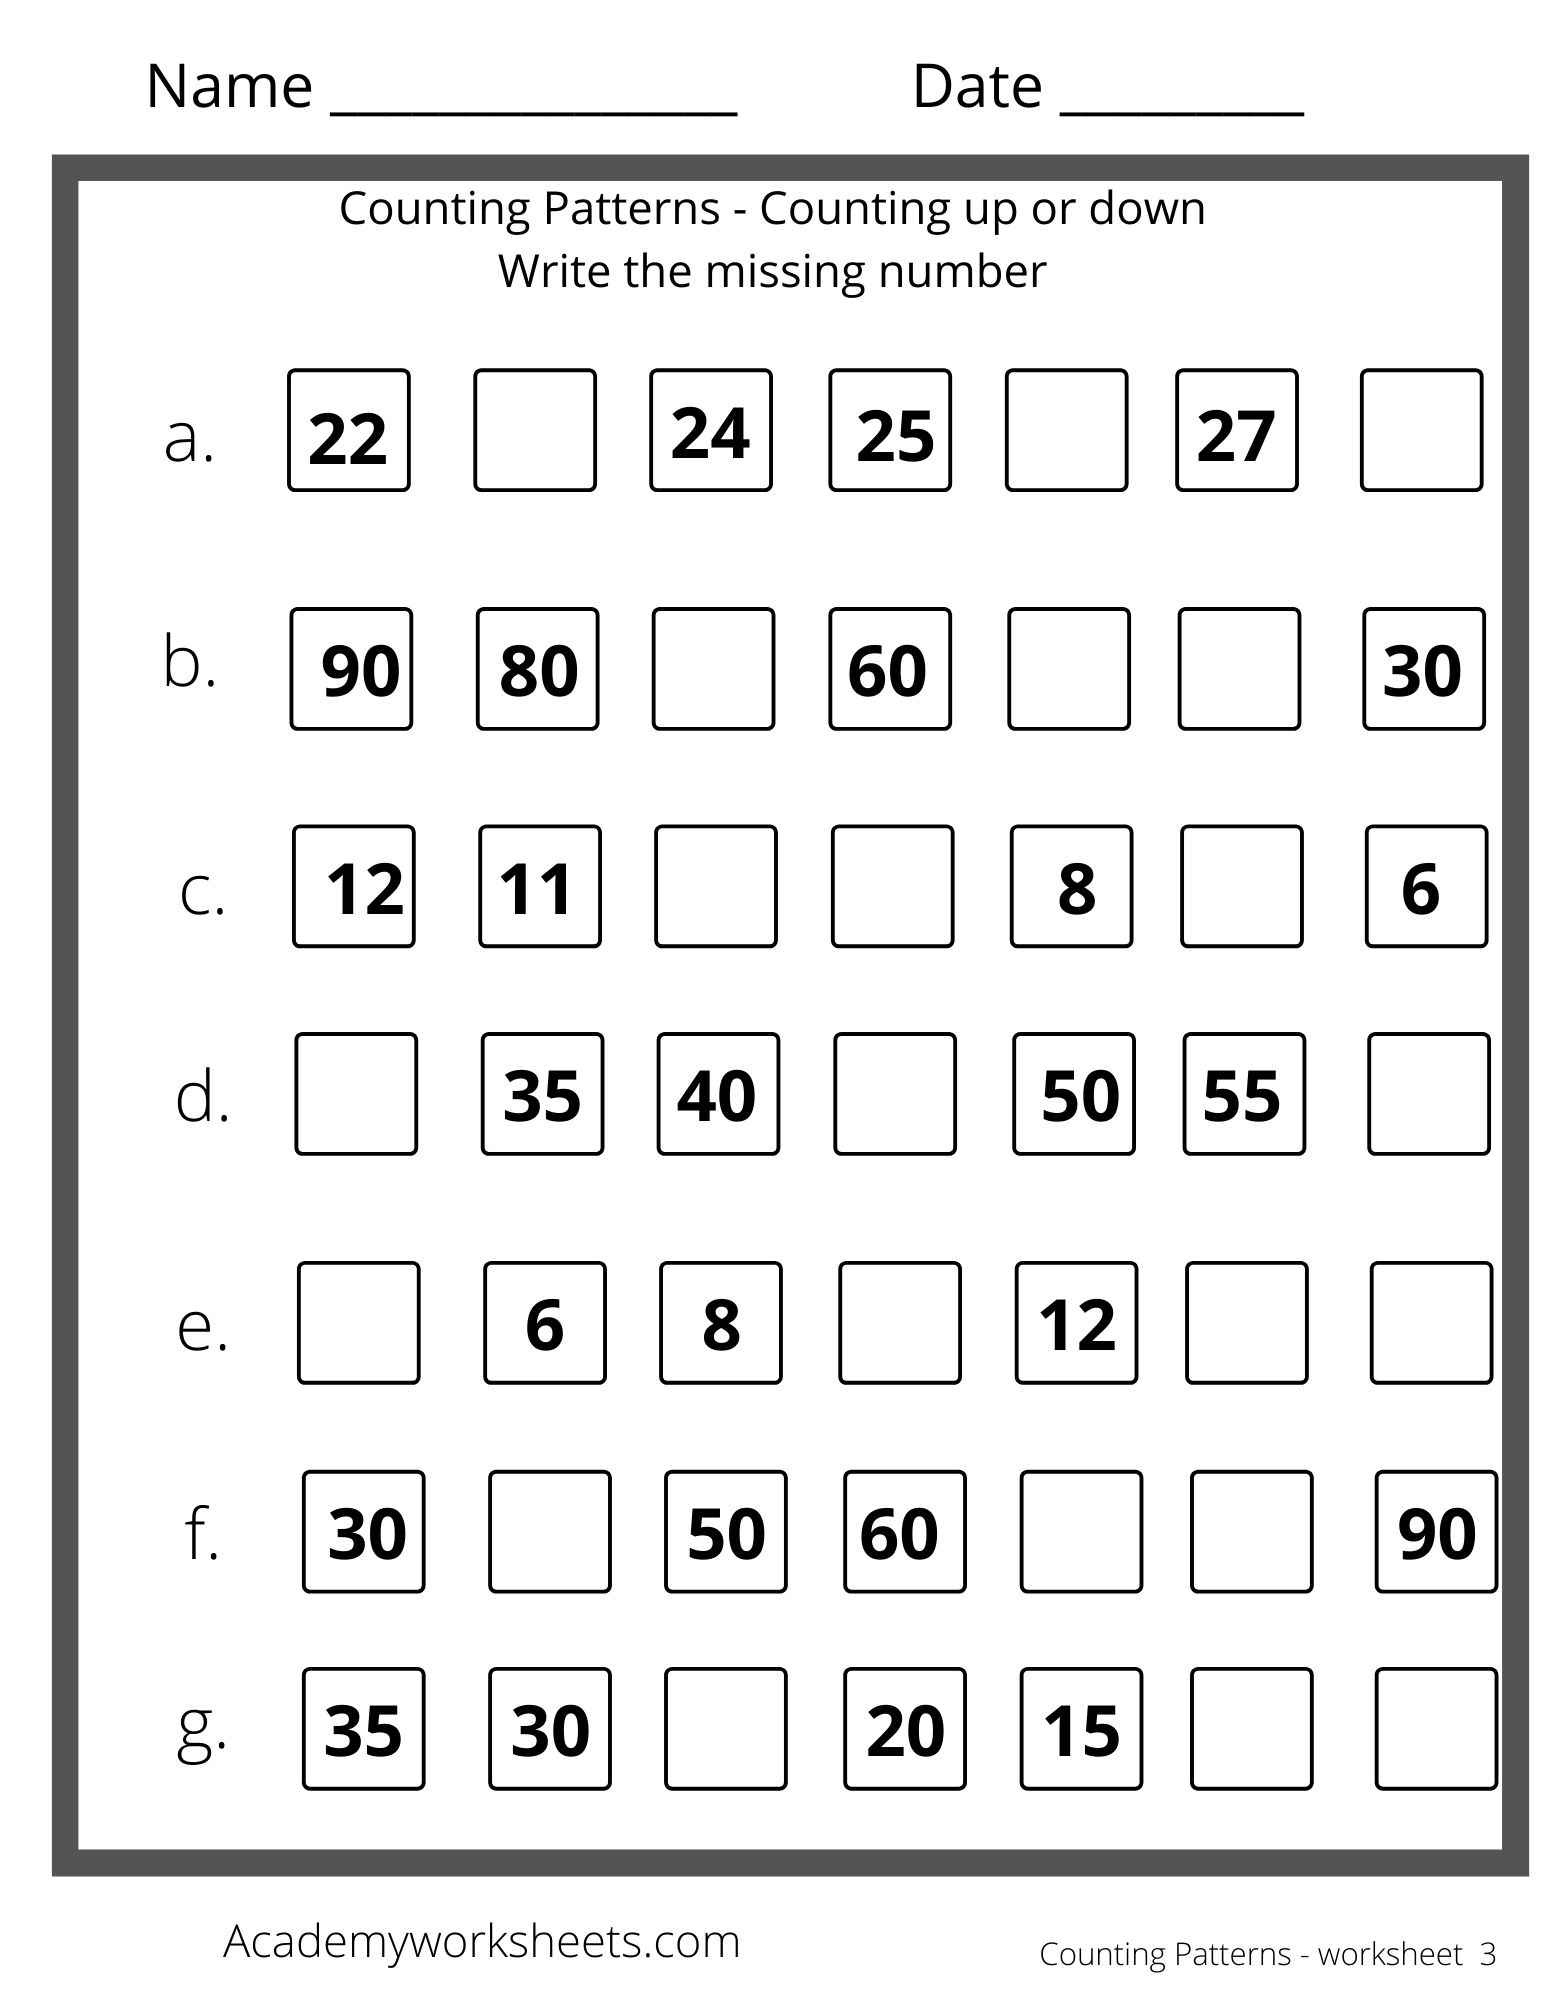 counting-patterns-math-worksheets-academy-worksheets